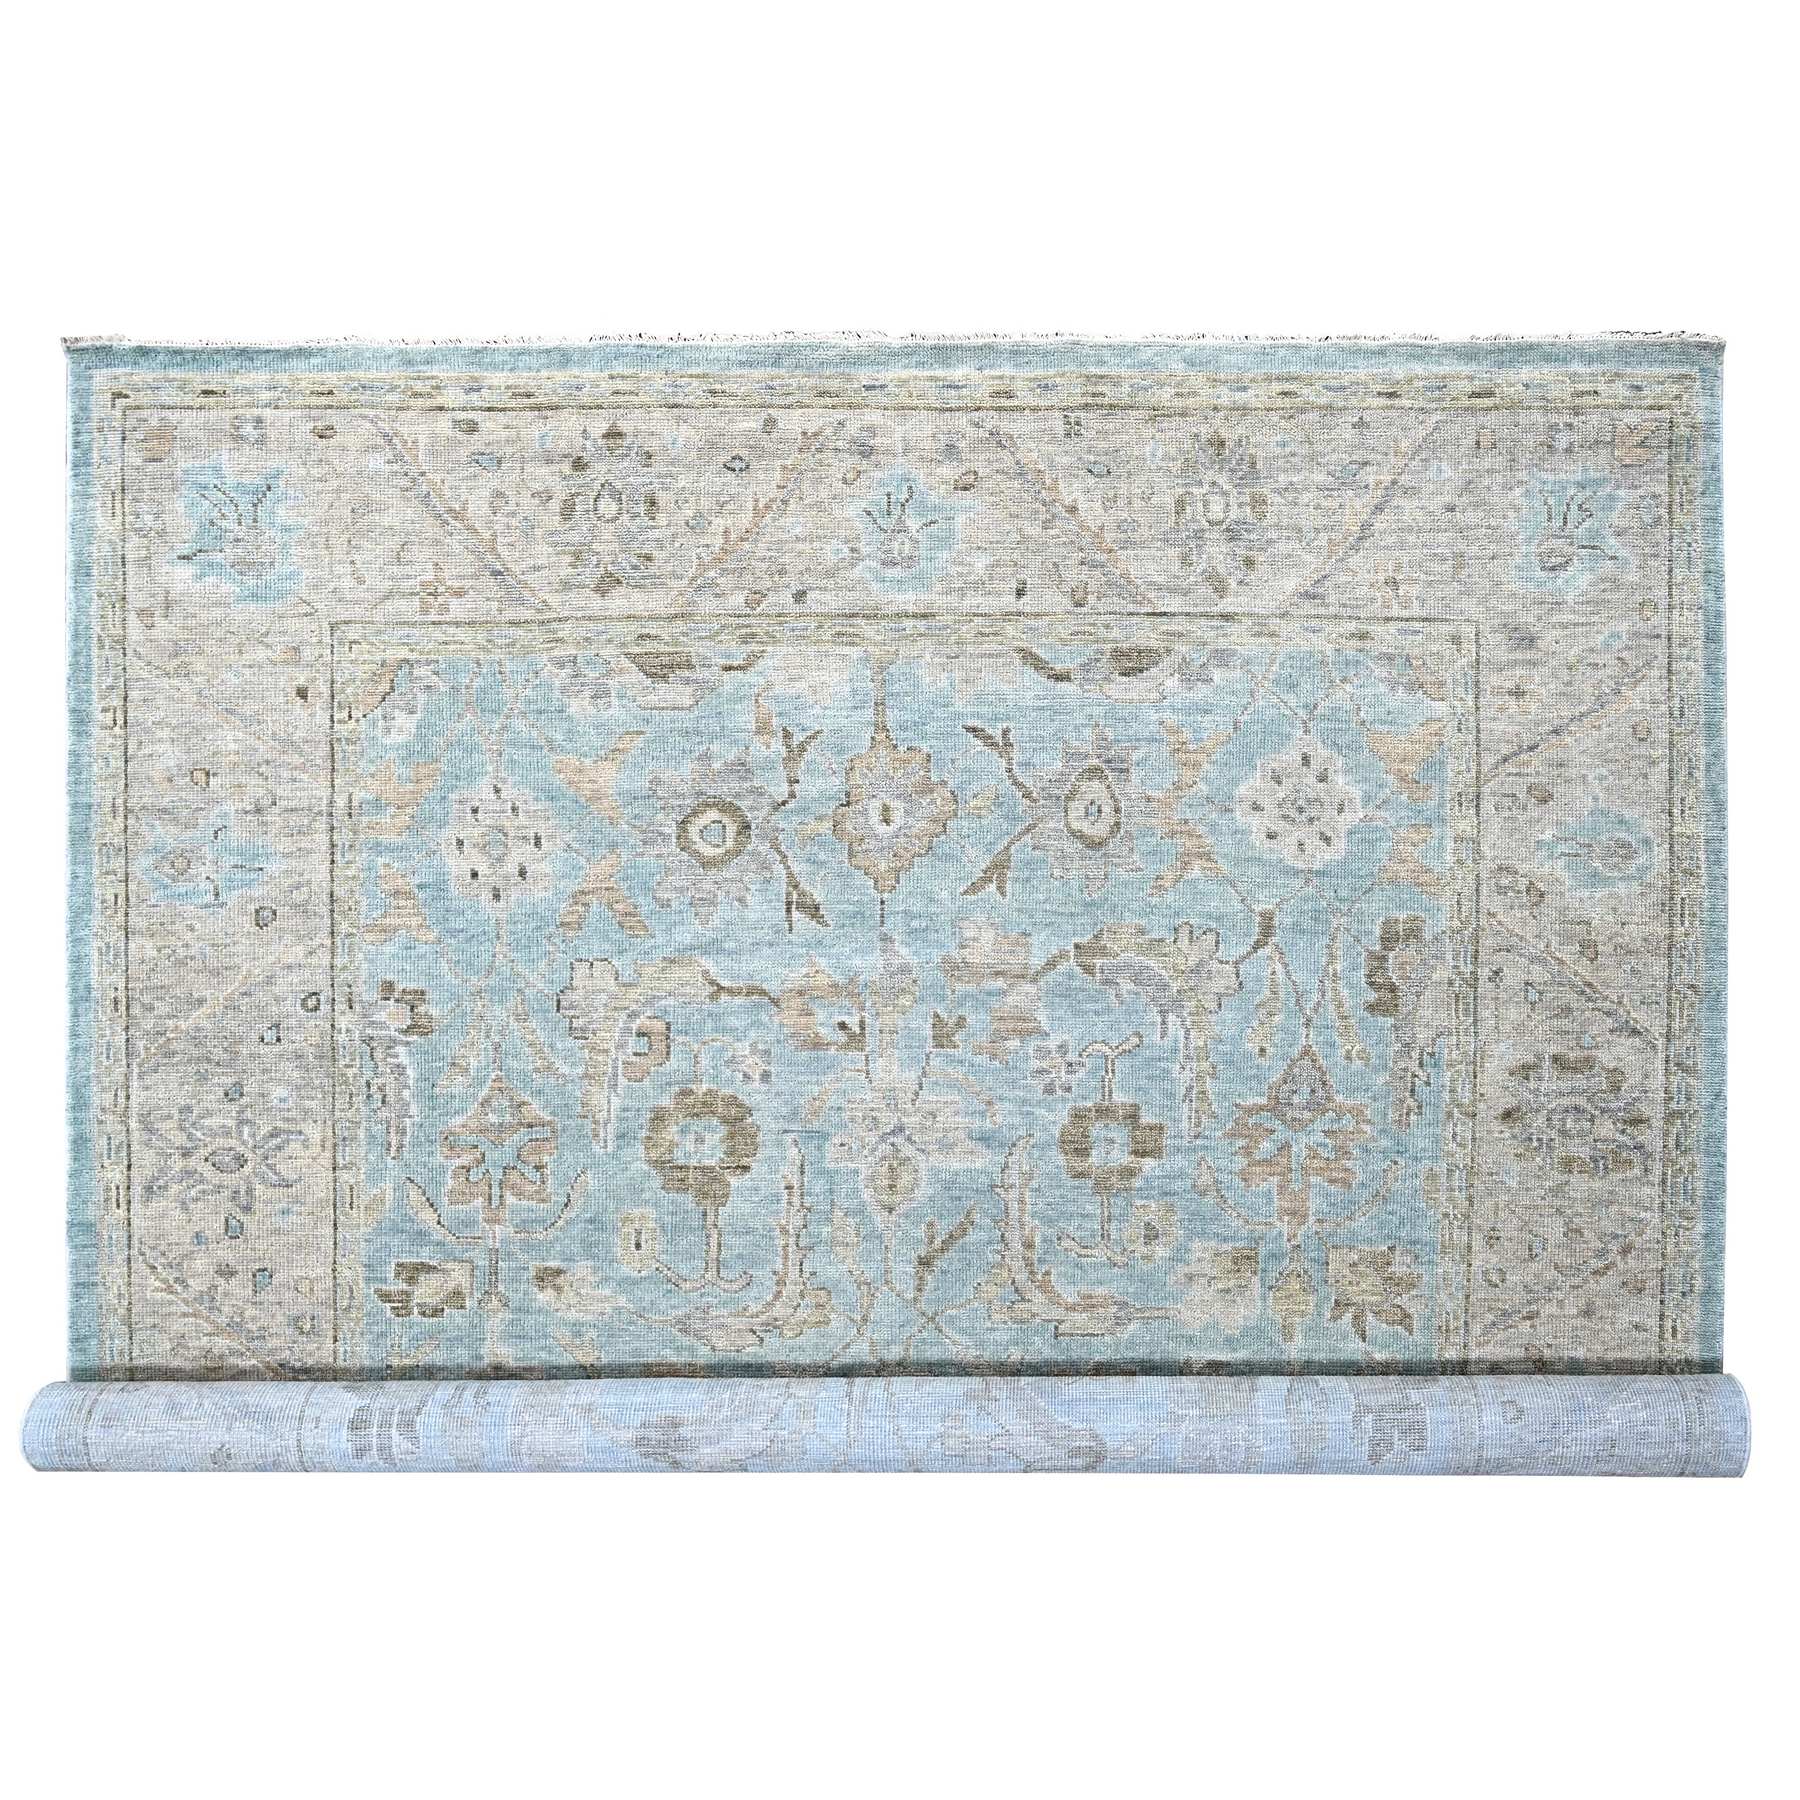 Moonmist Blue, Supple Collection, Oushak All Over Design, Tone On Tone, Soft Velvety Wool, Hand Knotted Vegetable Dyes, Oversized Oriental Rug